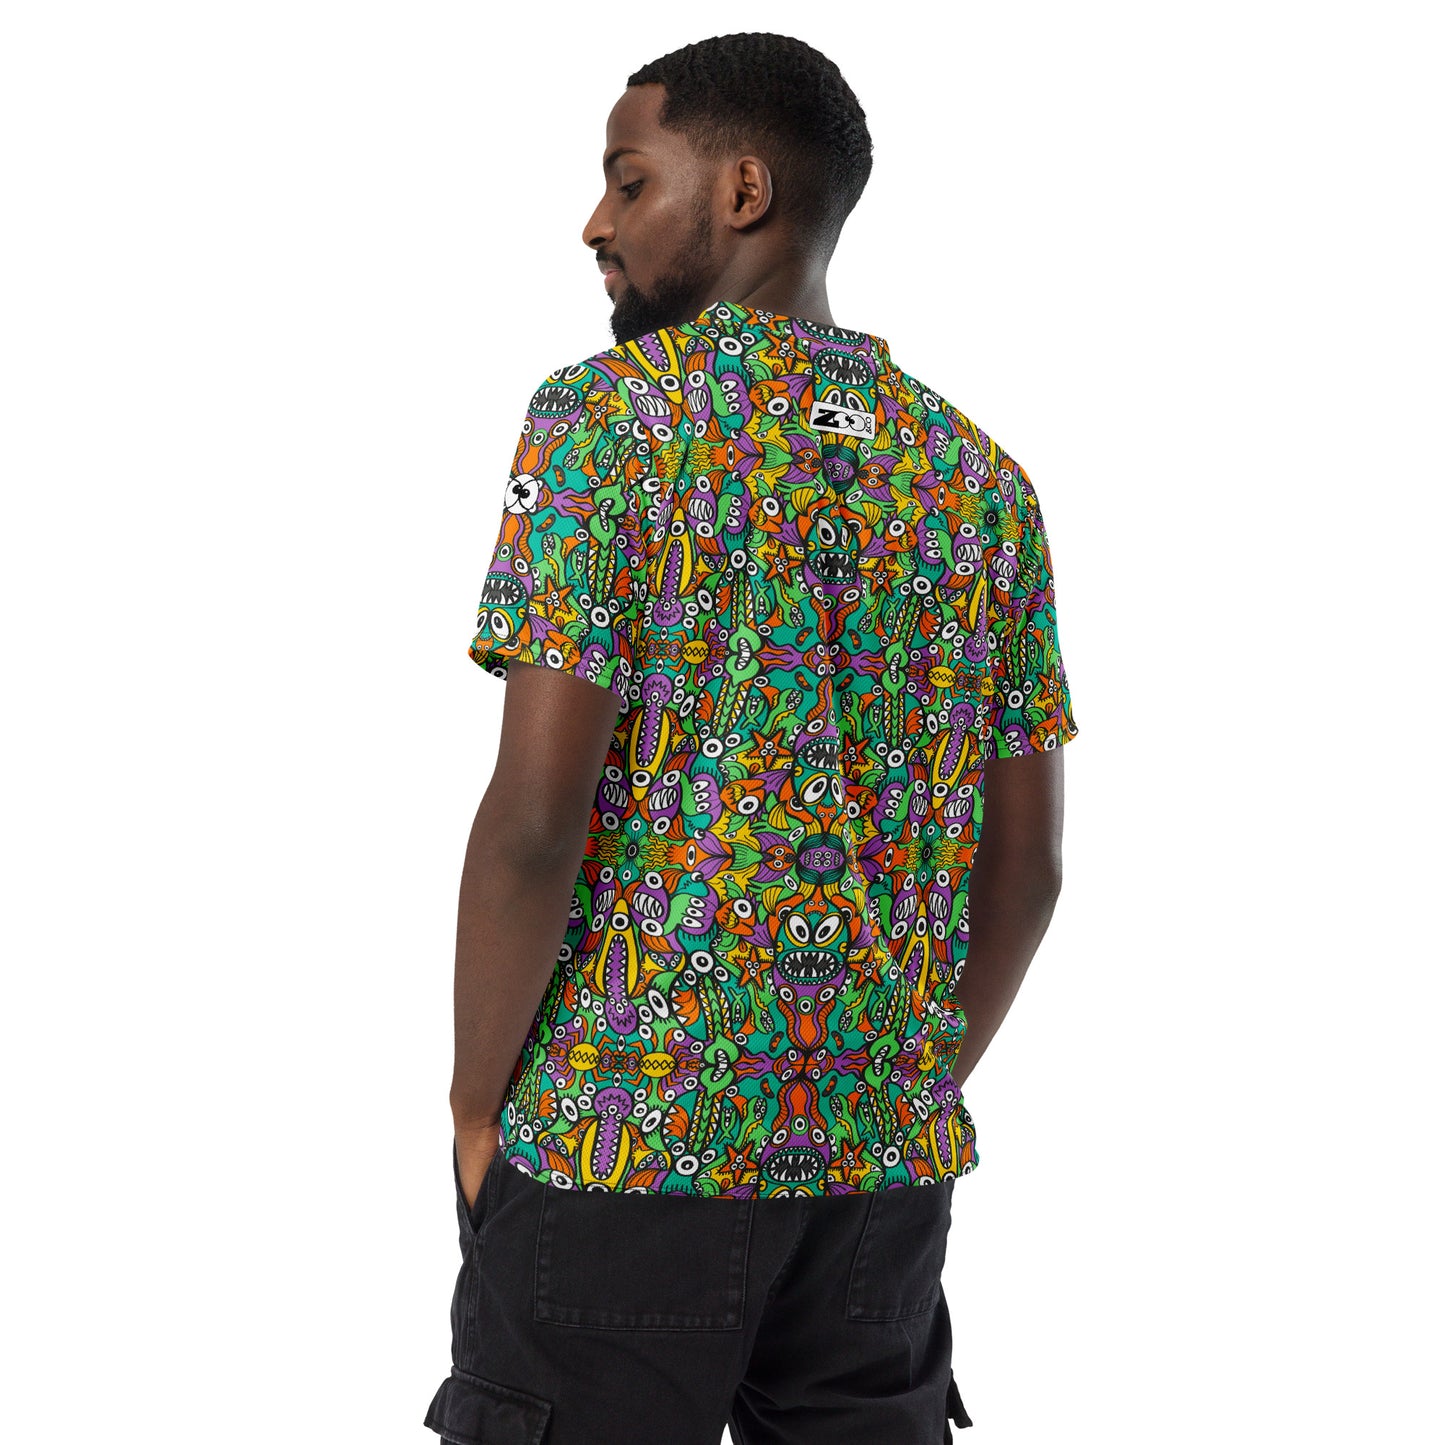 The vast ocean is full of doodle critters Recycled unisex sports jersey. Back view